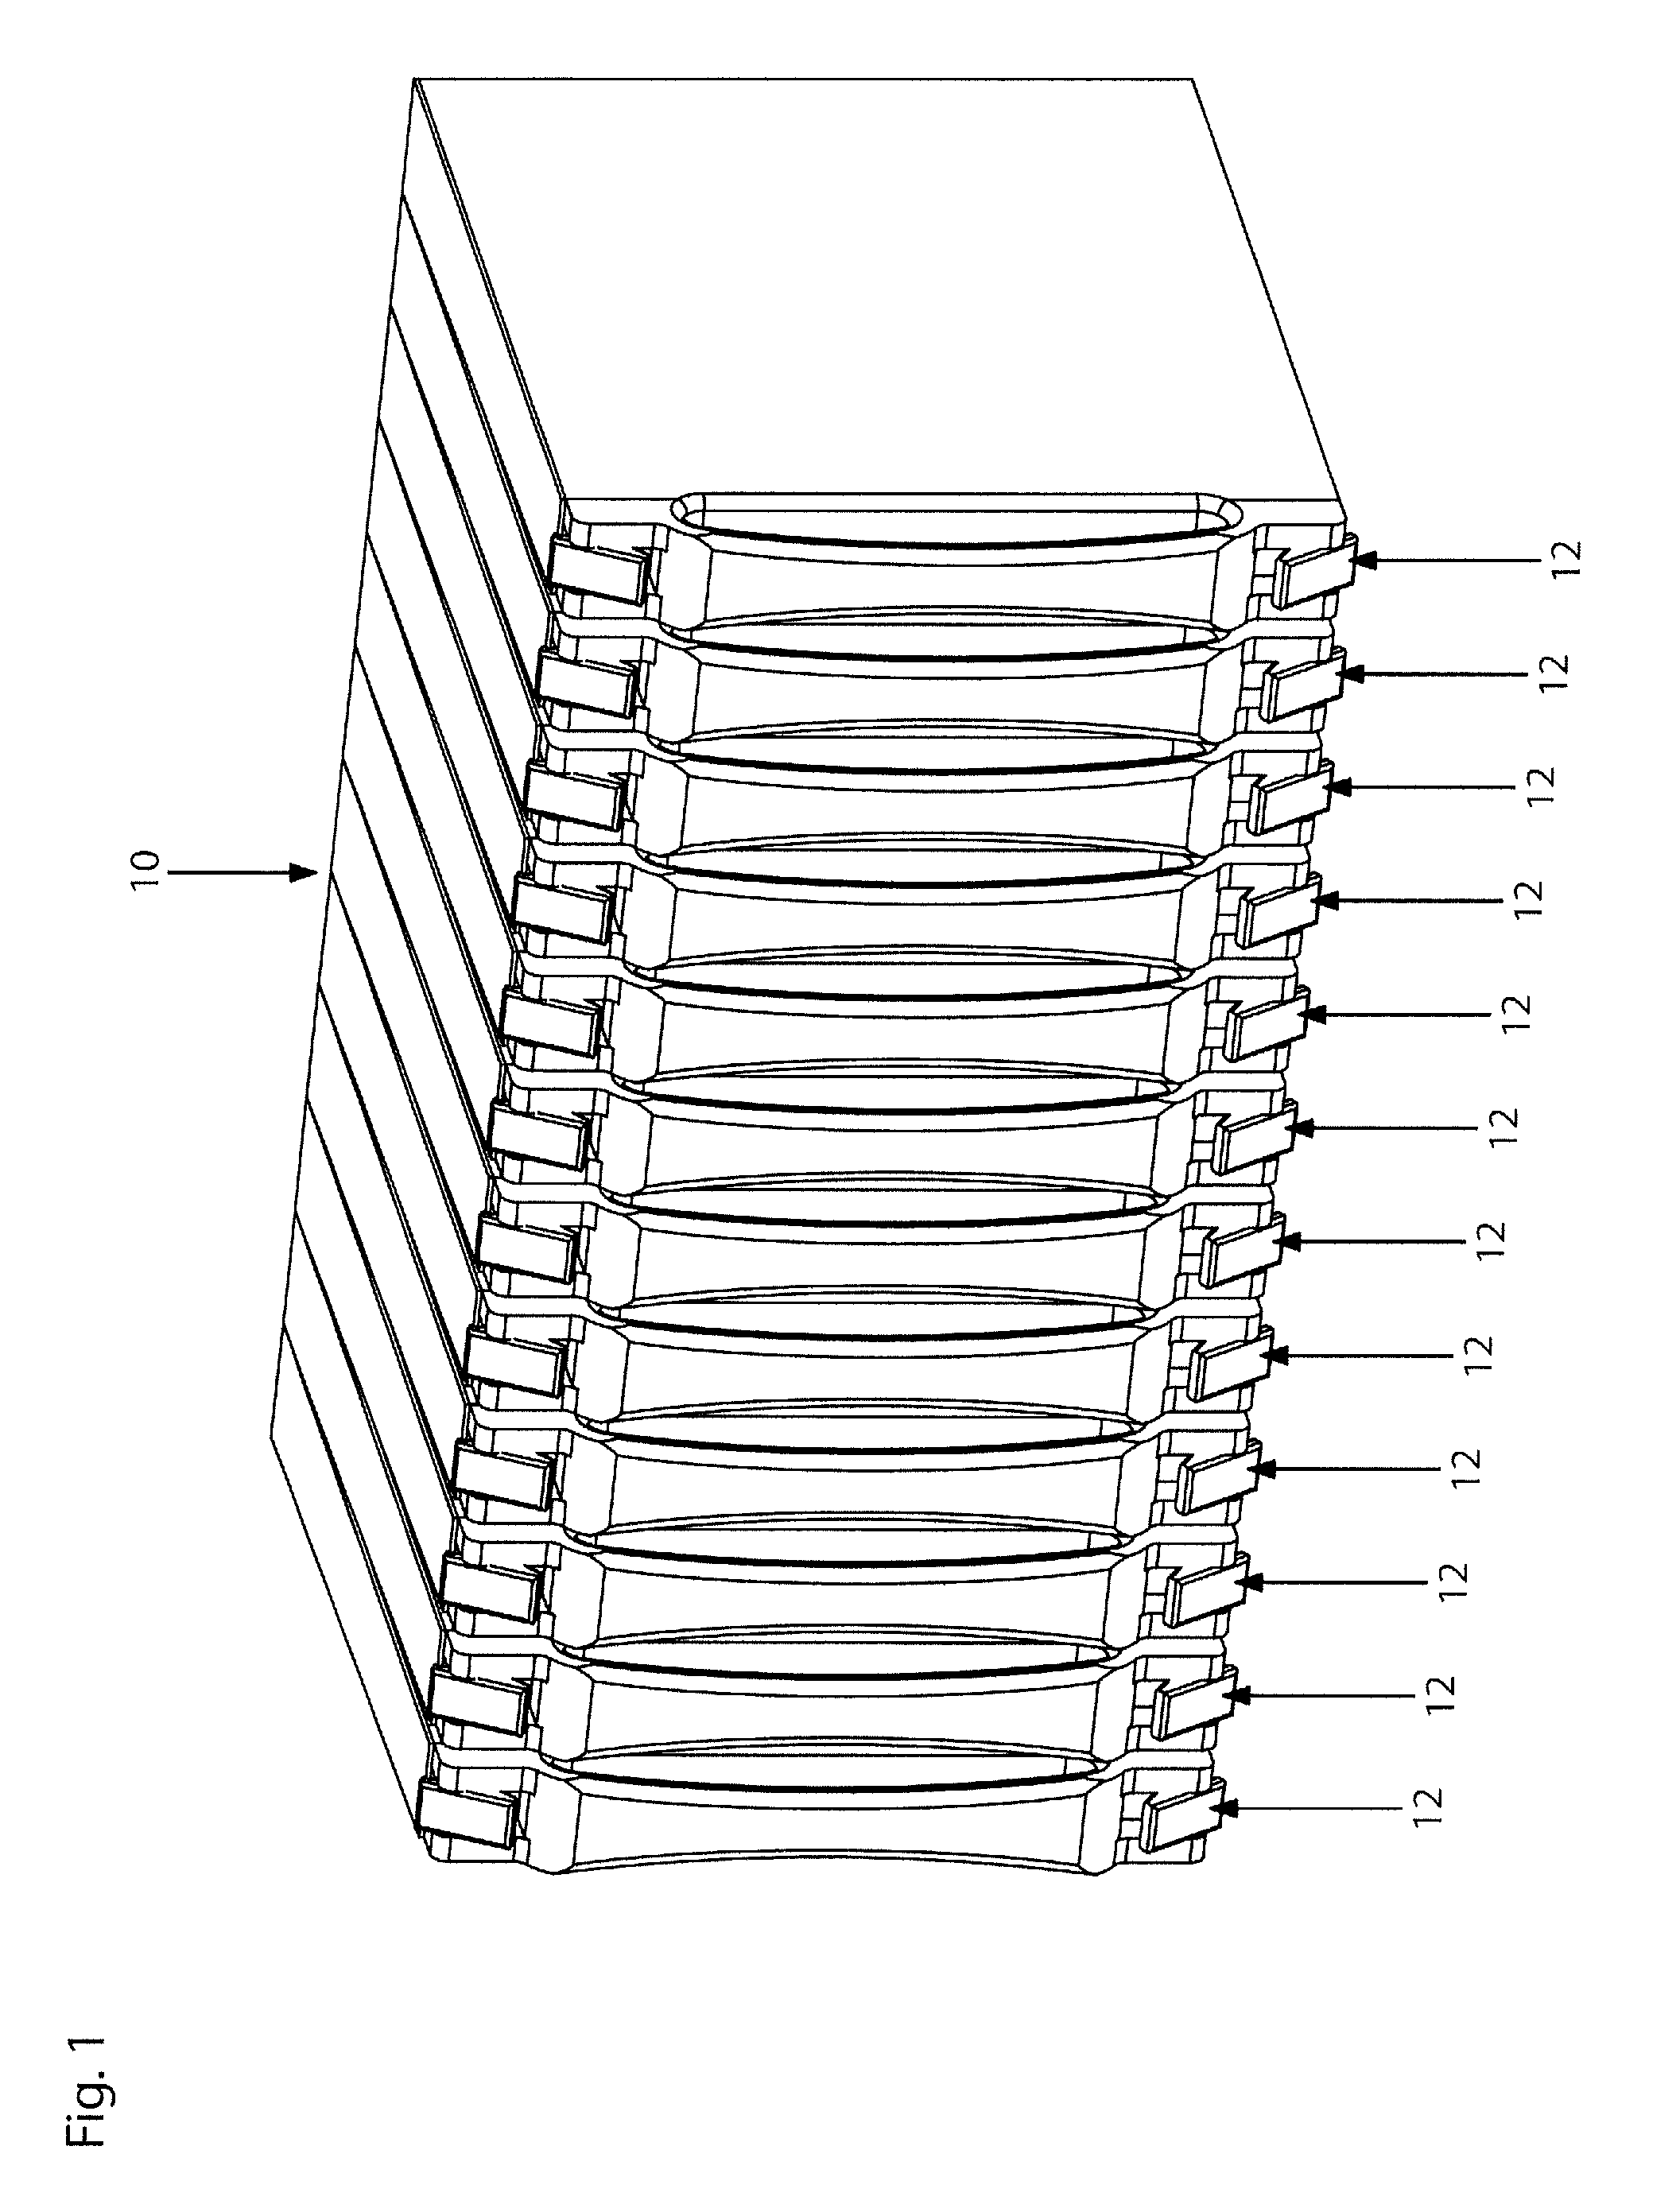 Case and rack system for liquid submersion cooling of electronic devices connected in an array